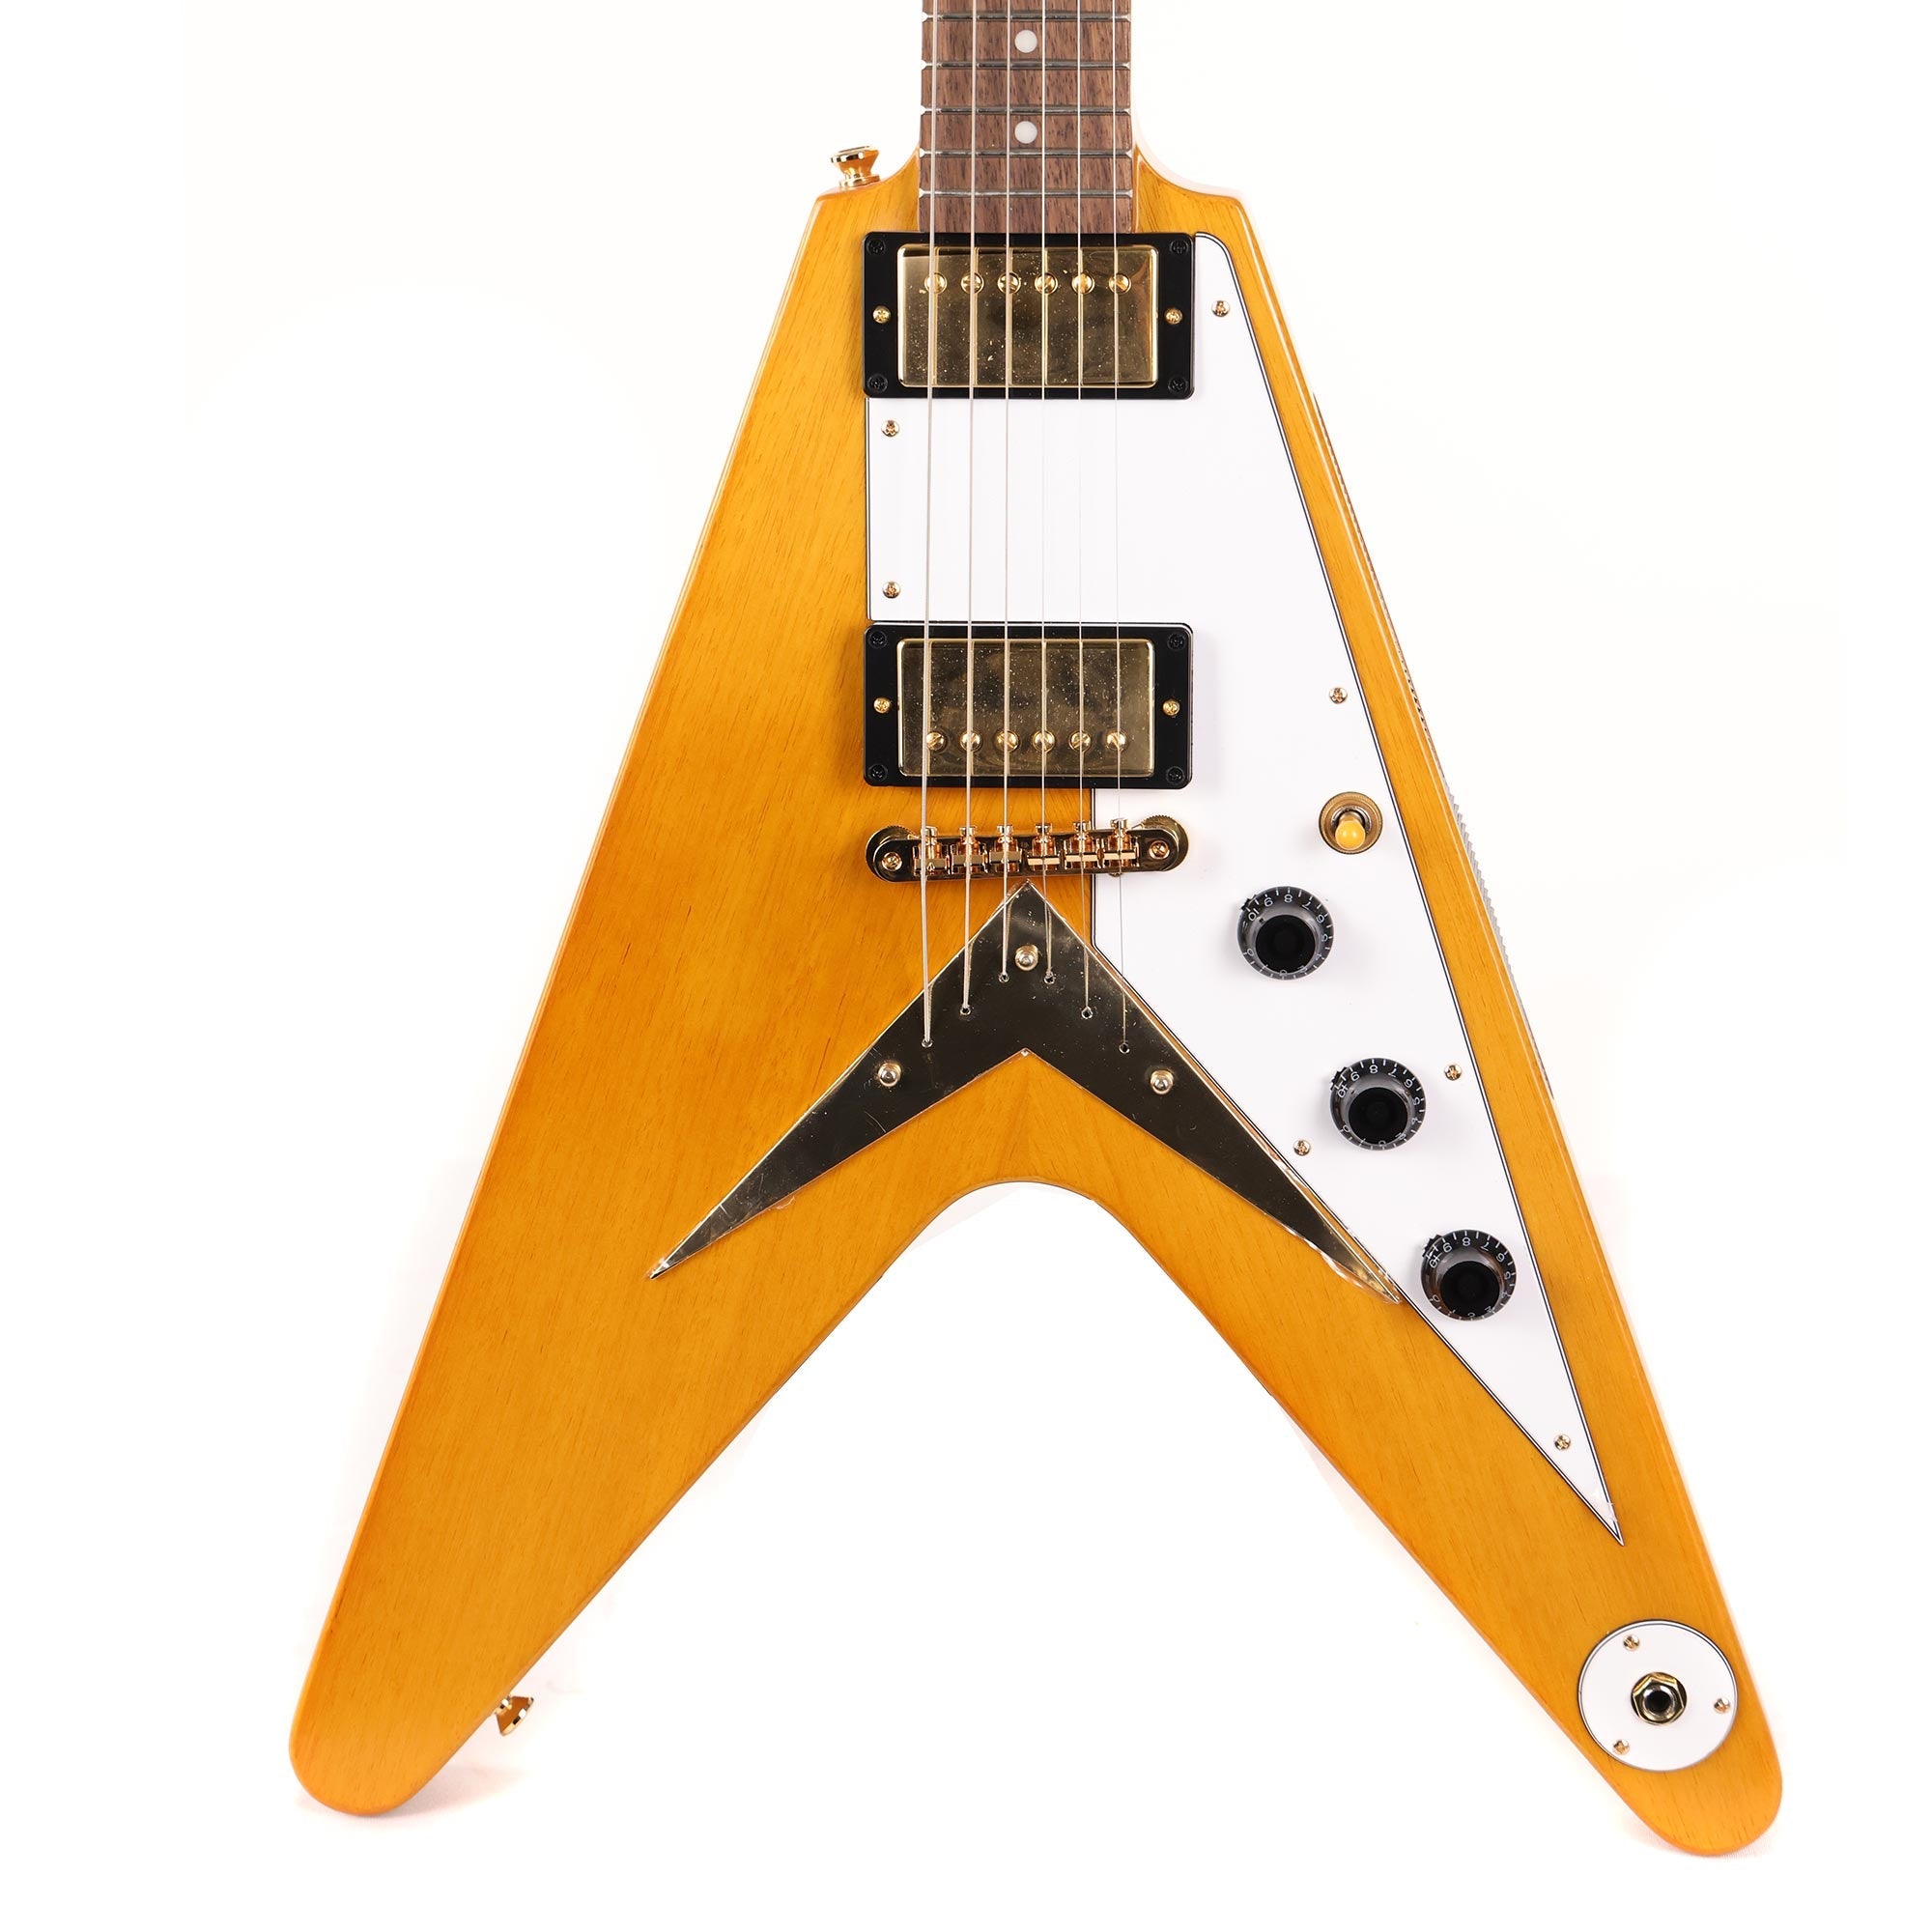 Epiphone Inspired by Gibson 1958 Korina Flying V | The Music Zoo